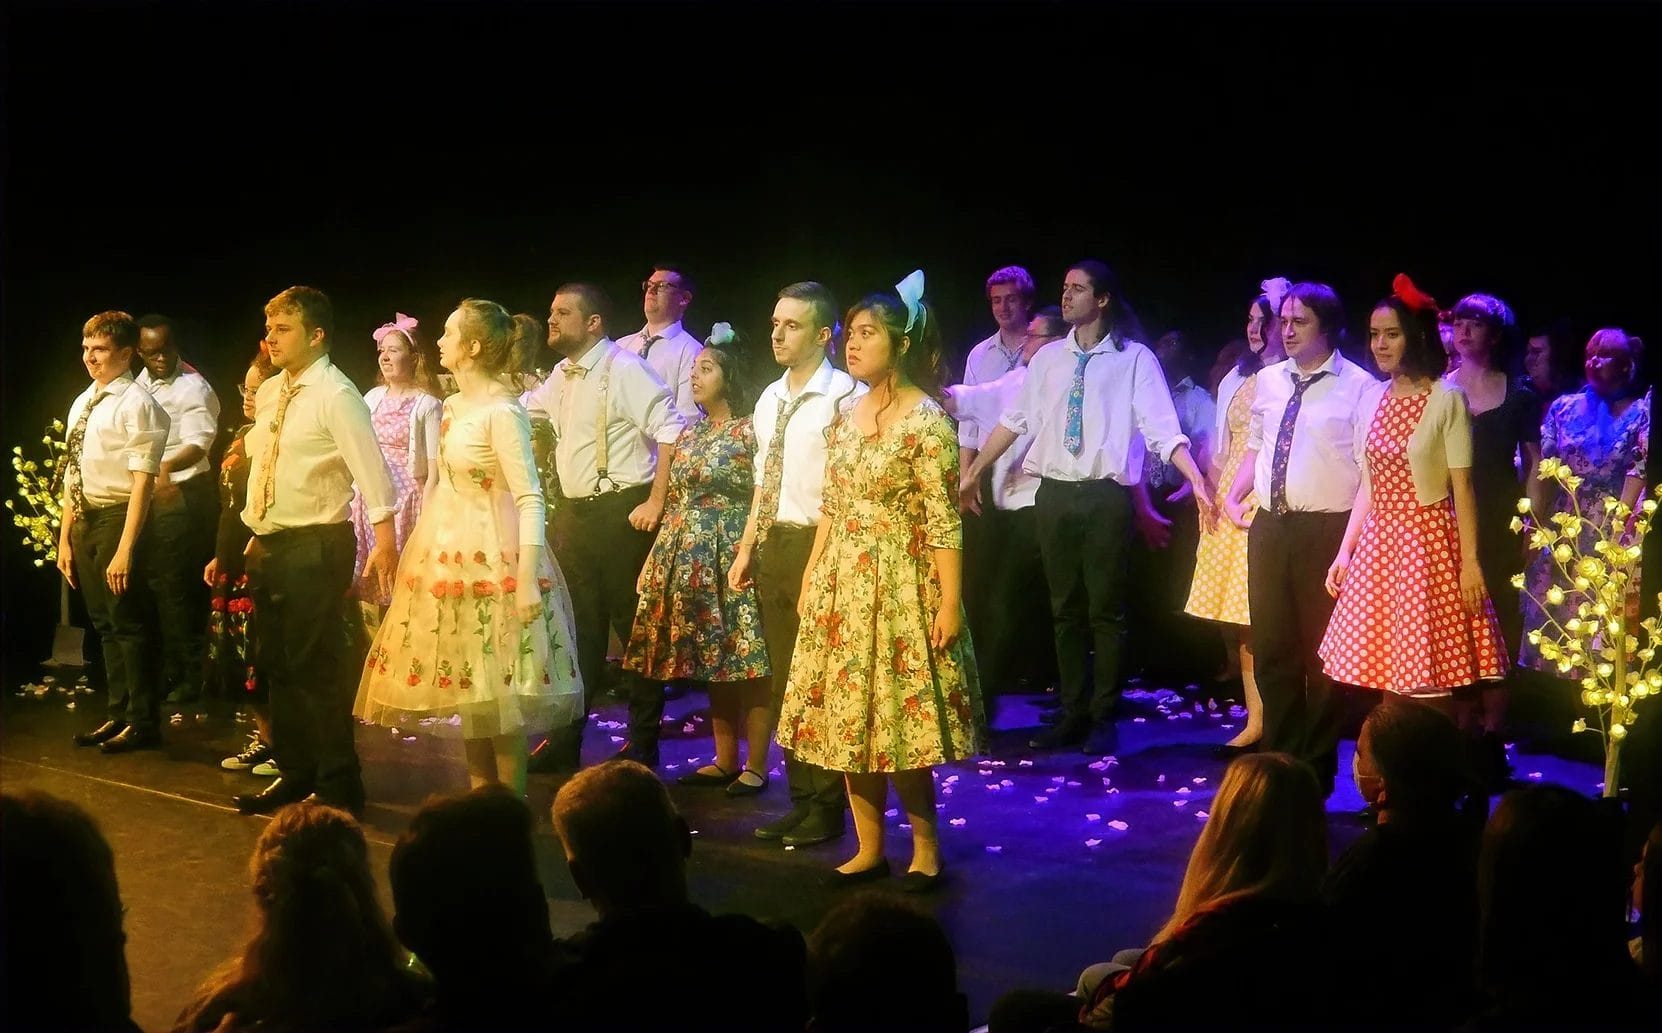 A diverse group of performers photographed on stage in costume. They wear white shorts with colourful ties, and vibrant floral dresses. There are petals scattered across the stage.